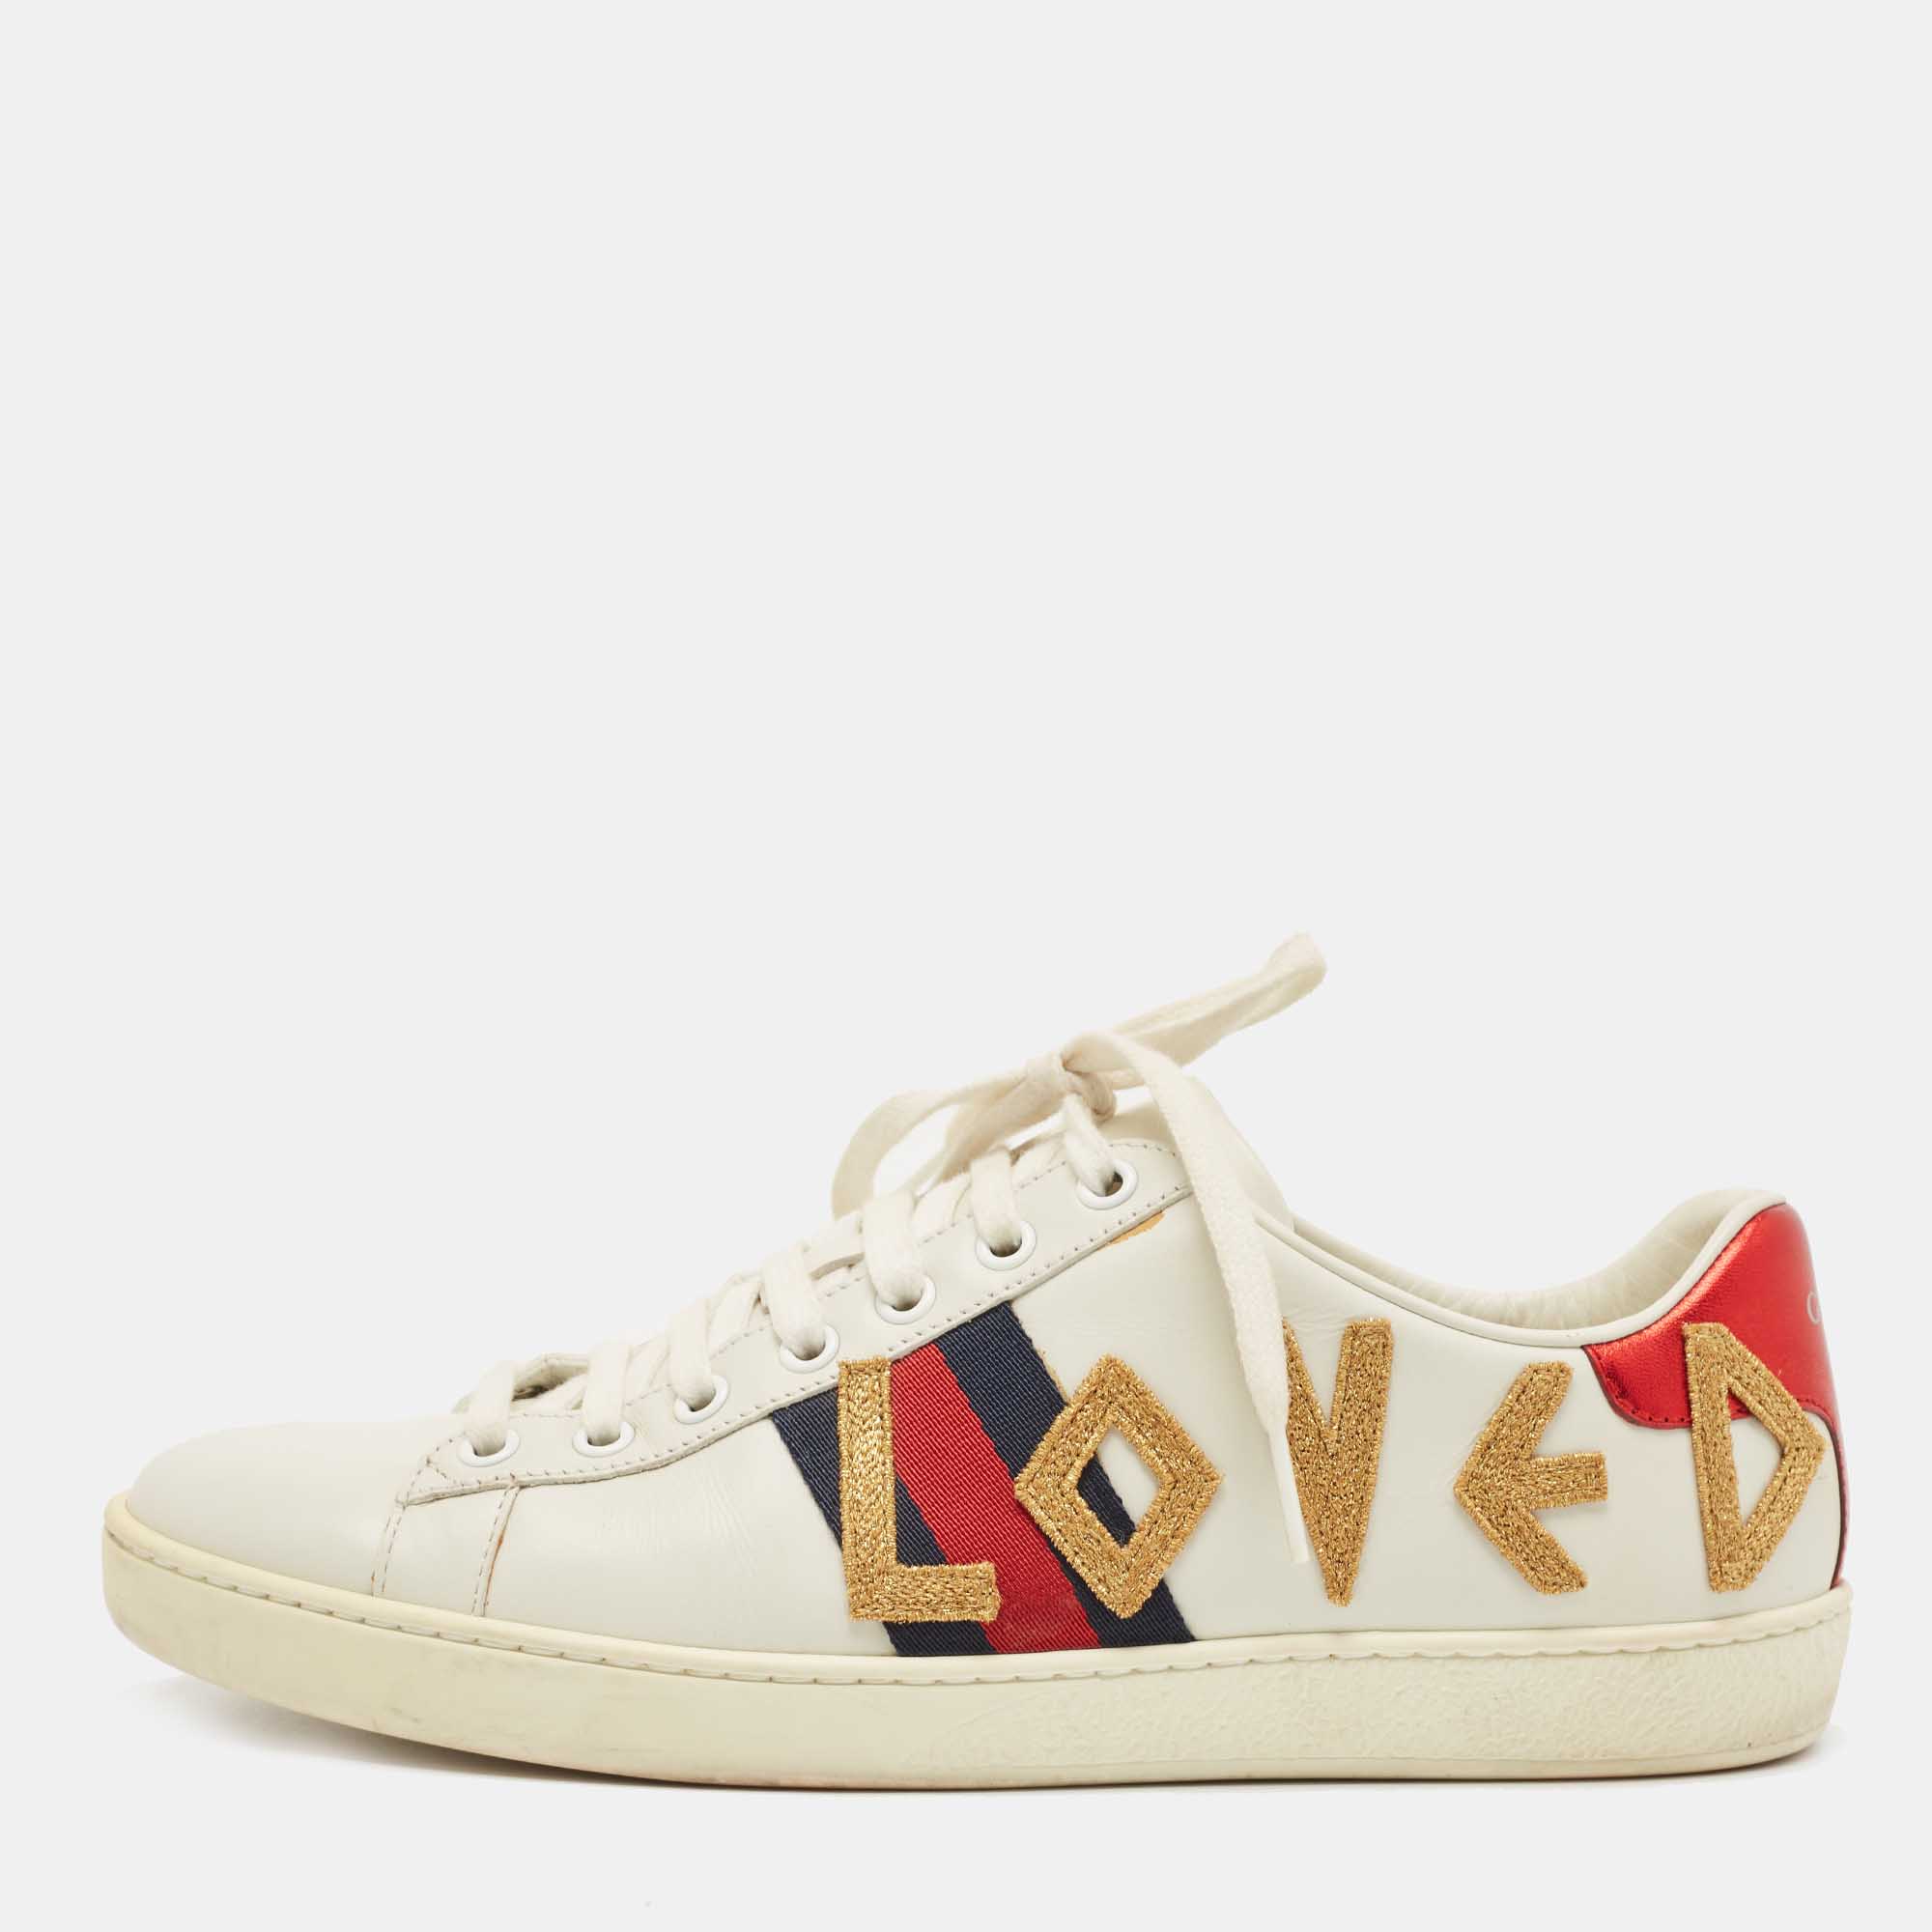 Gucci White Leather Loved Ace Sneakers Size 38.5